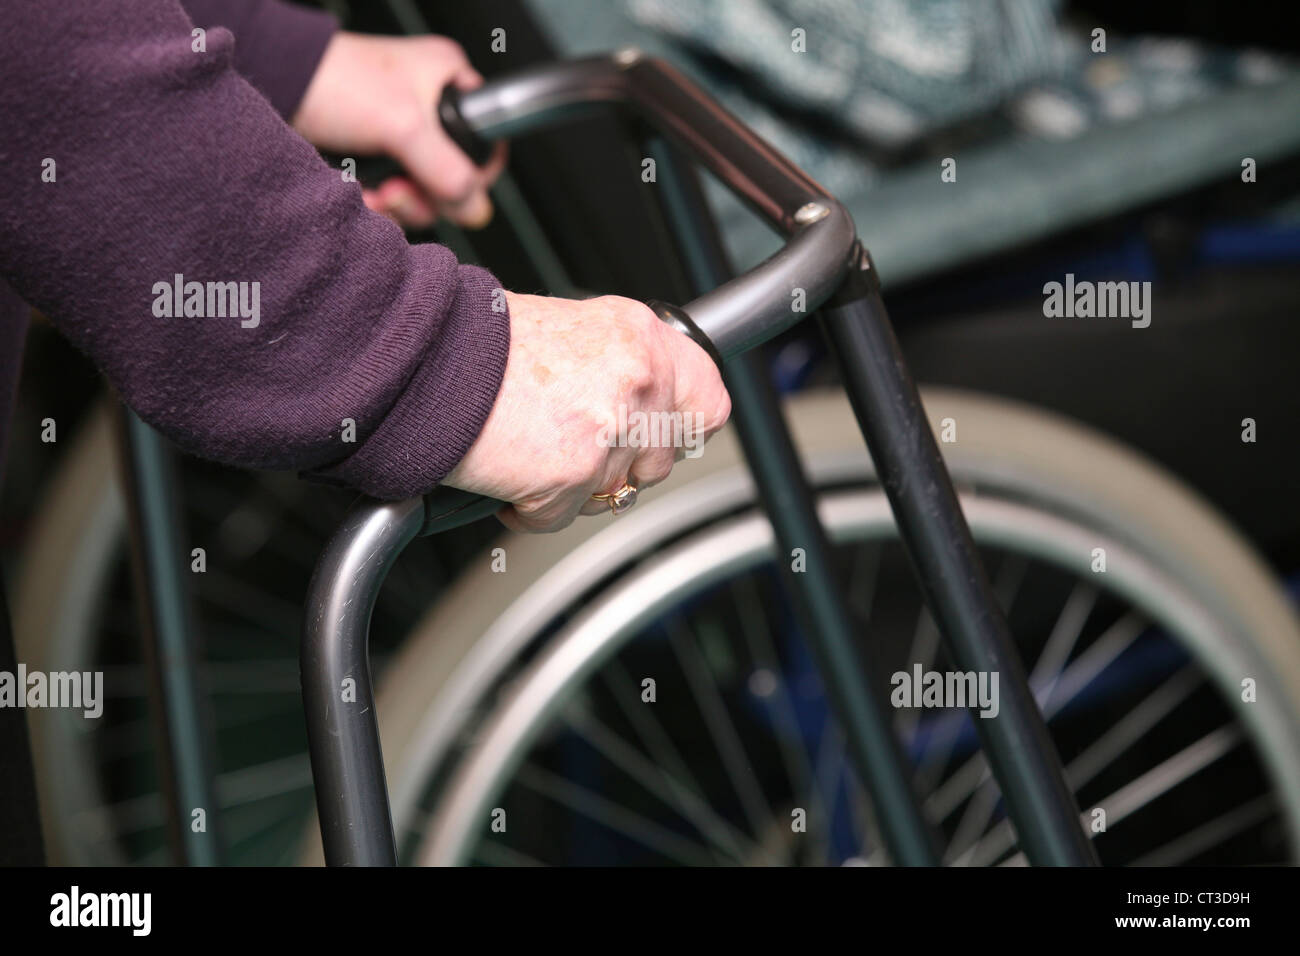 WALKER FOR HANDICAPPED PERSON Stock Photo